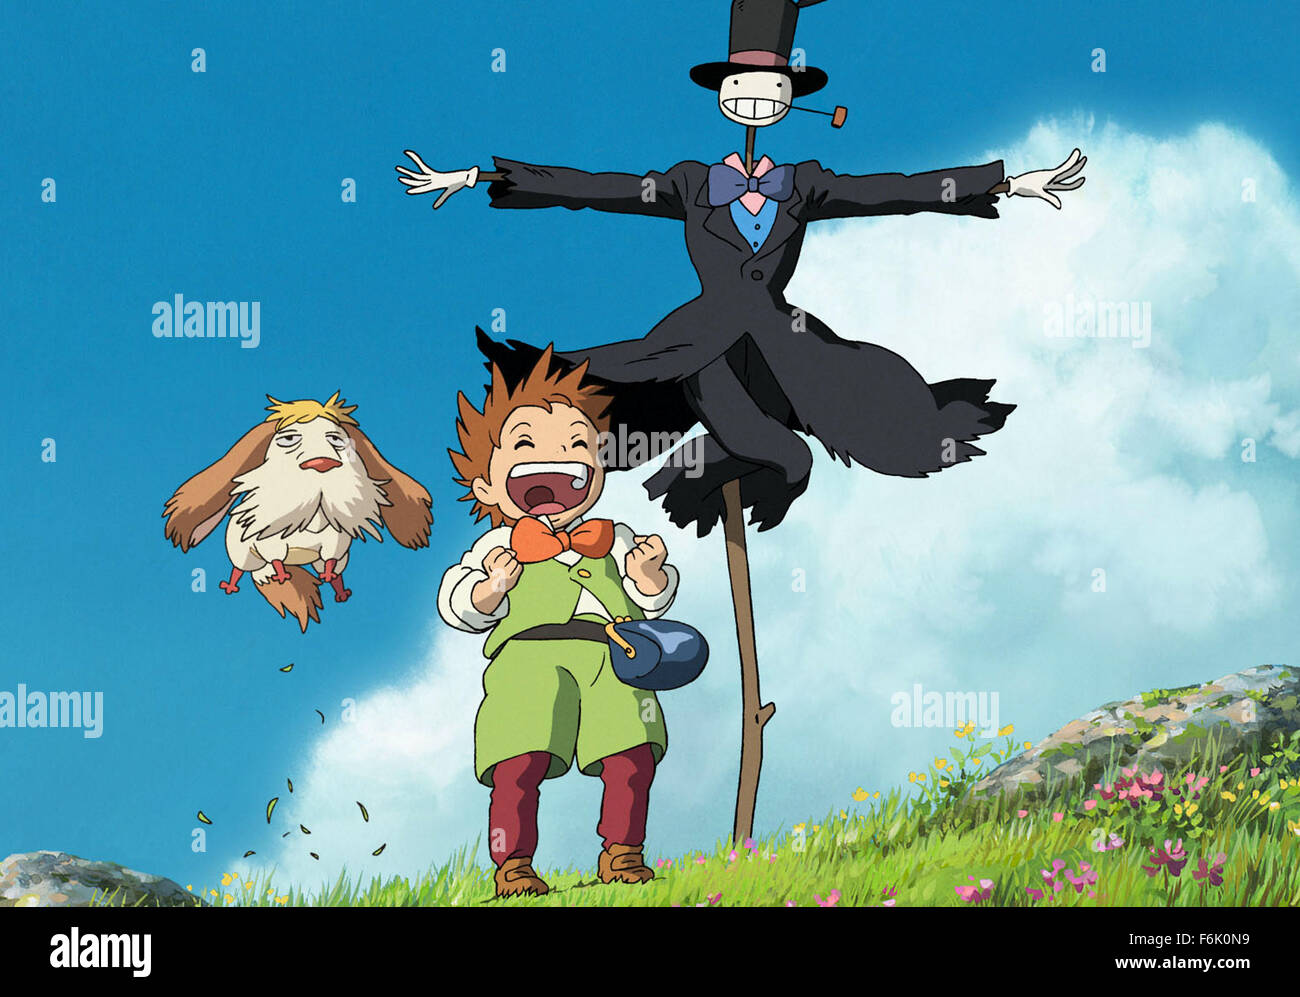 100+] Howl's Moving Castle Pictures